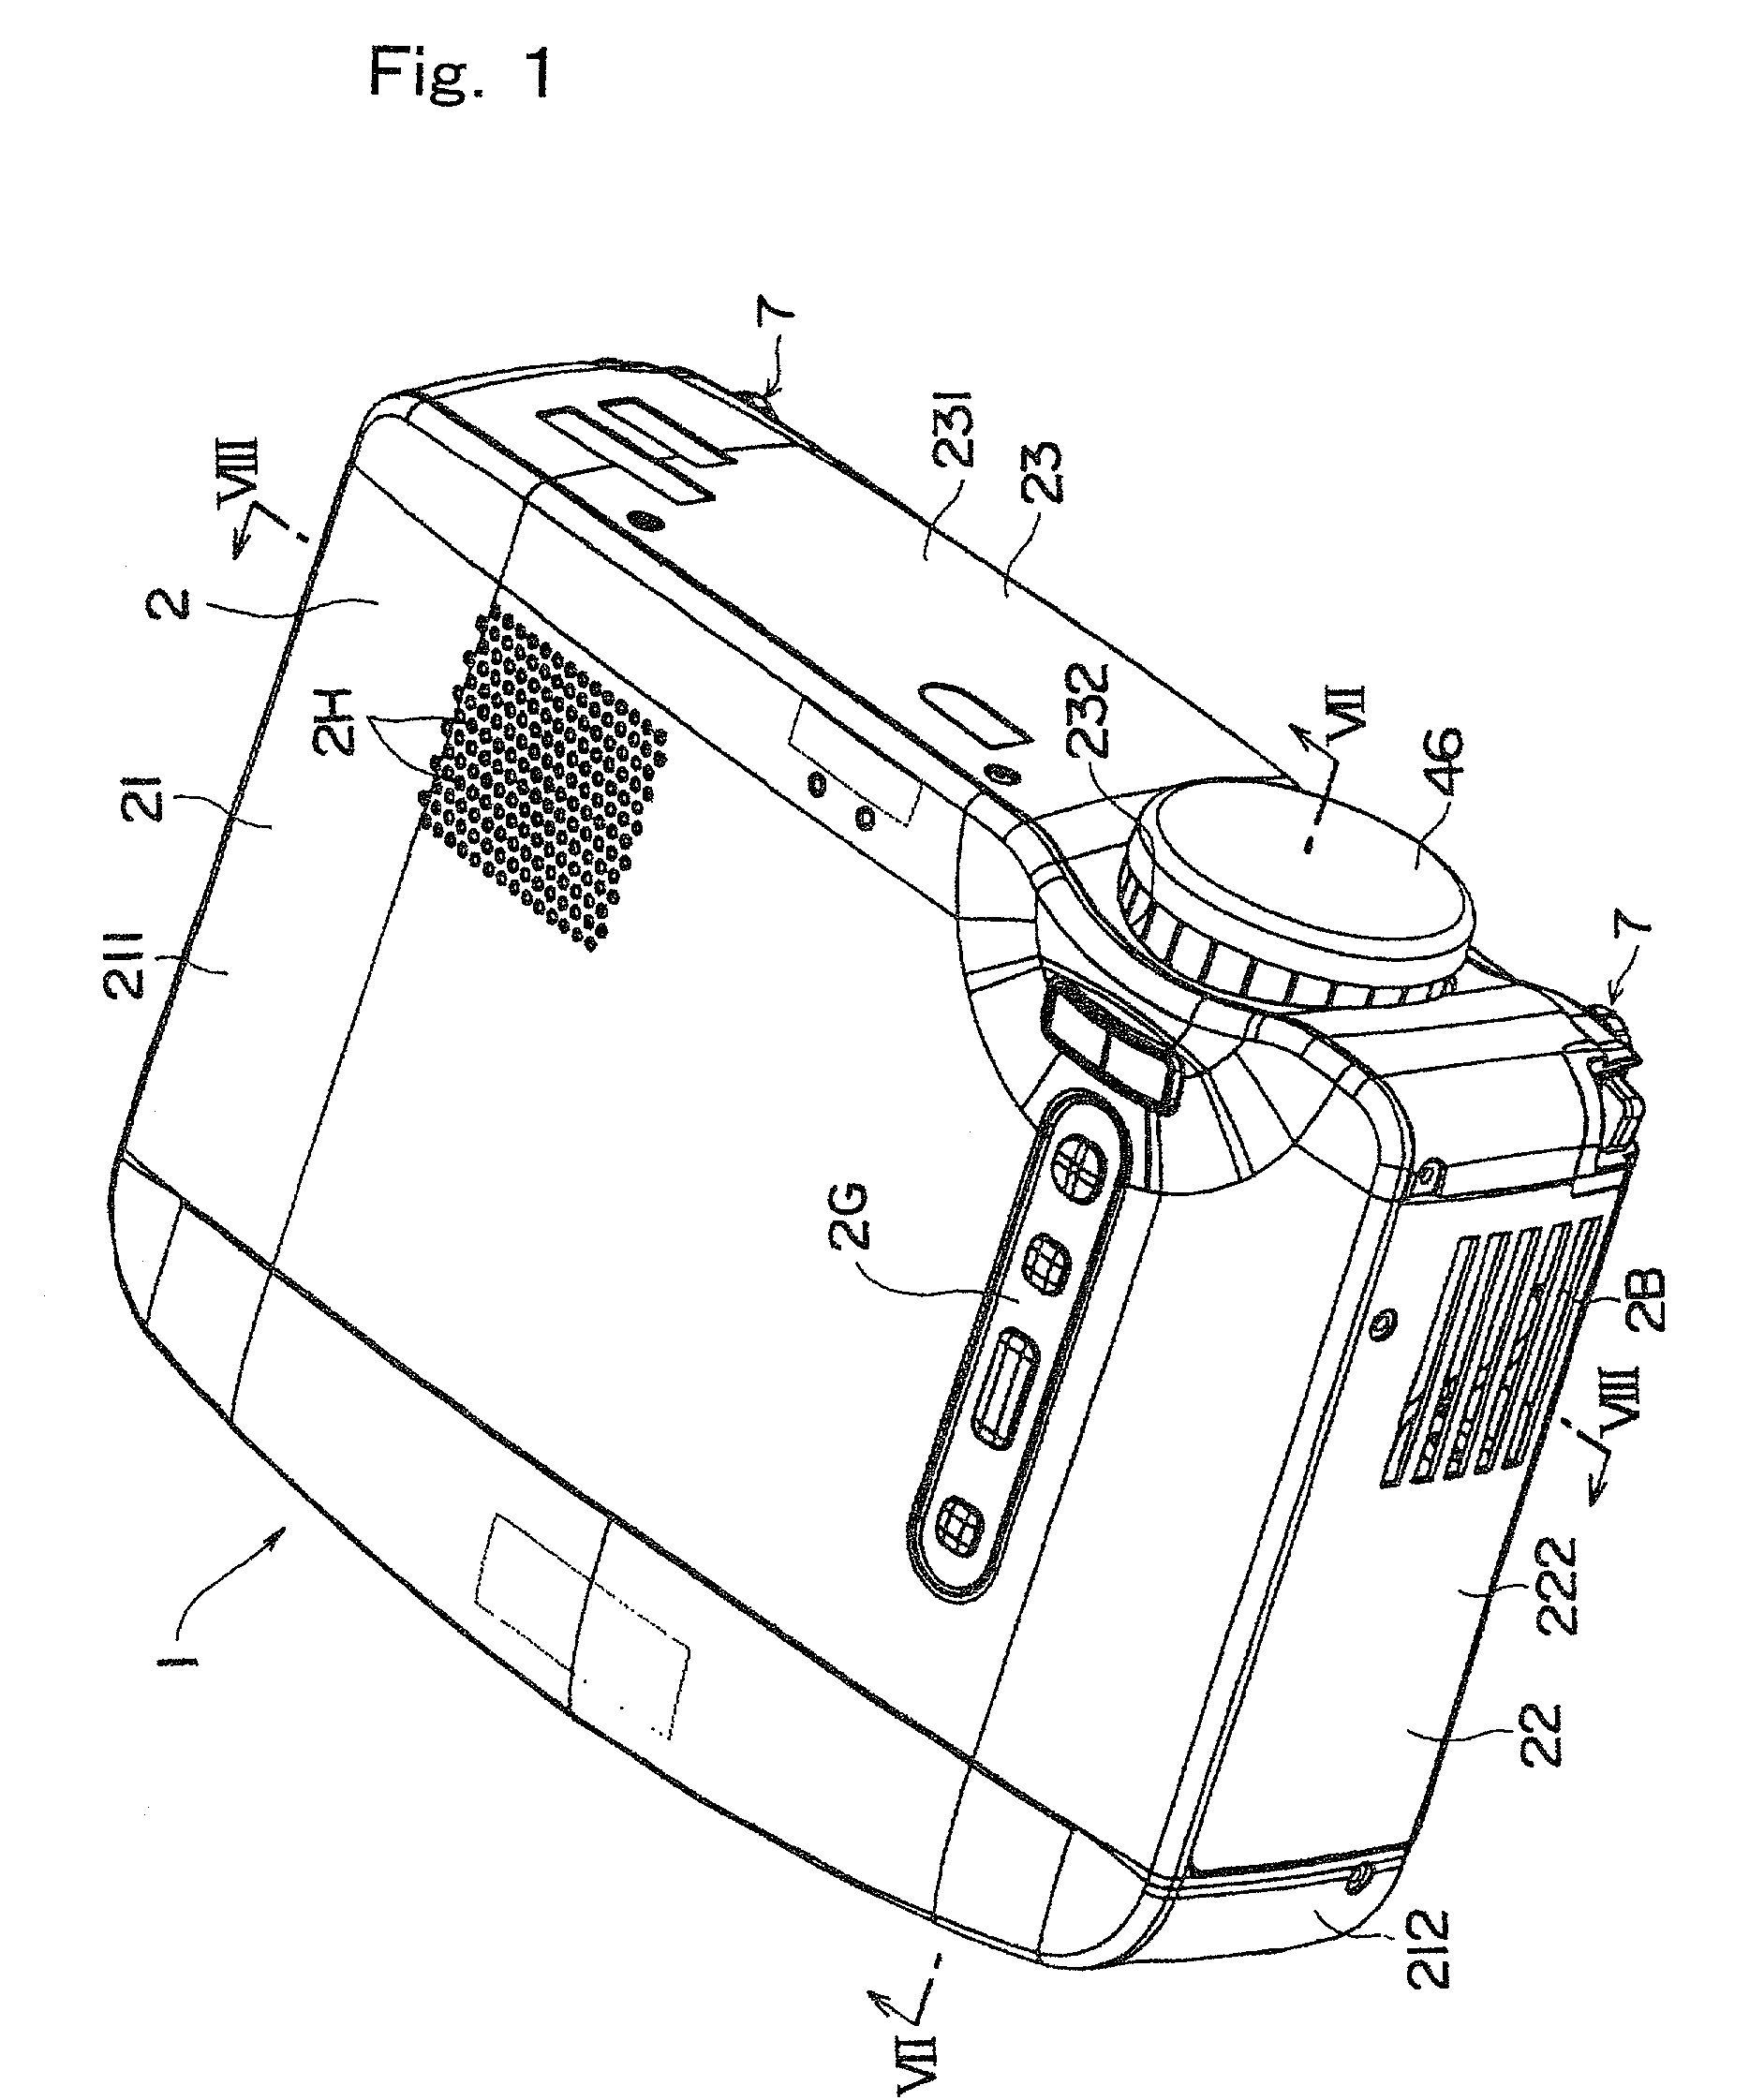 Projector having a cooling passage that cools the light source and outer case